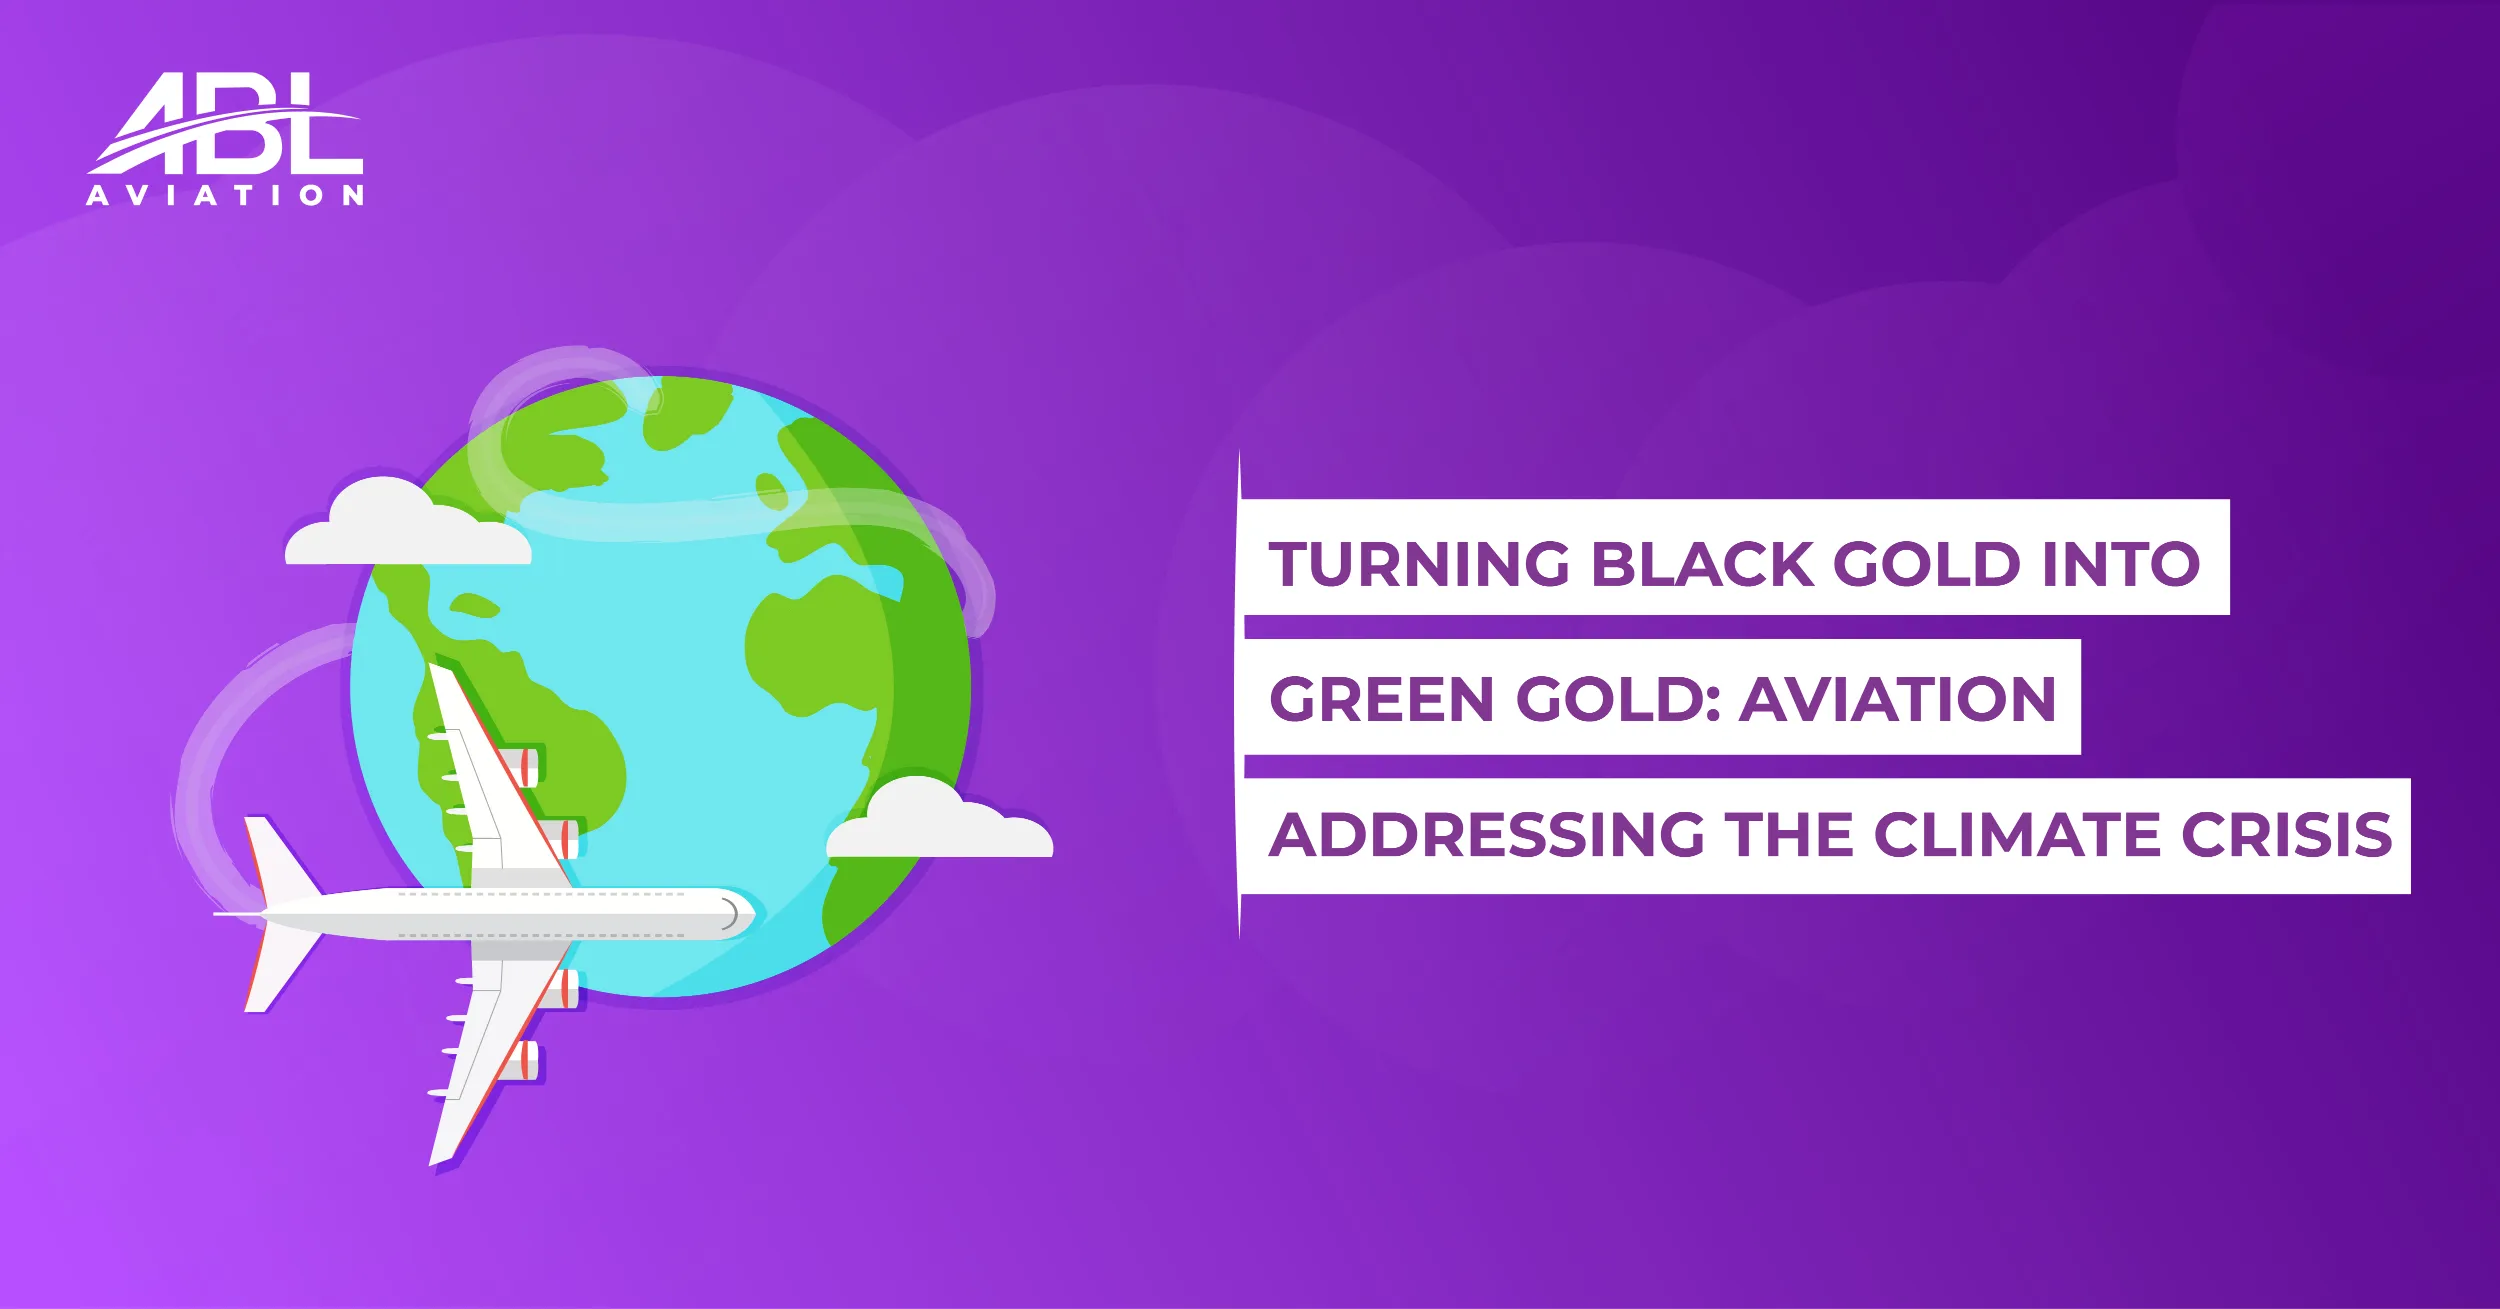 ABL Aviation Releases the January 2022 Insights Report – “Turning Black Gold into Green Gold: Aviation Addressing the Climate Crisis”